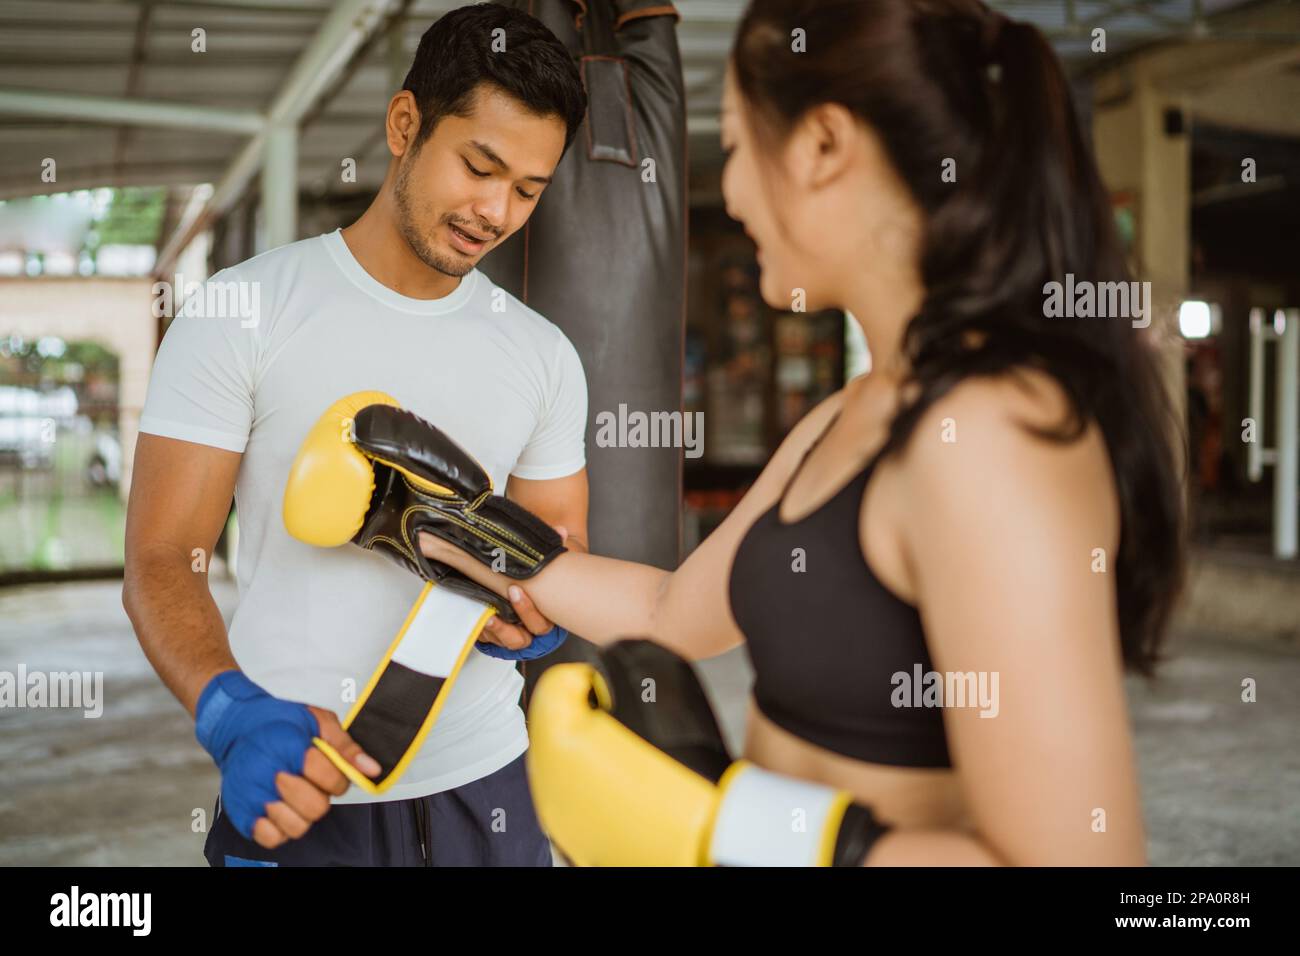 a boxing coach helping the female boxer to wearing the boxing gloves Stock Photo